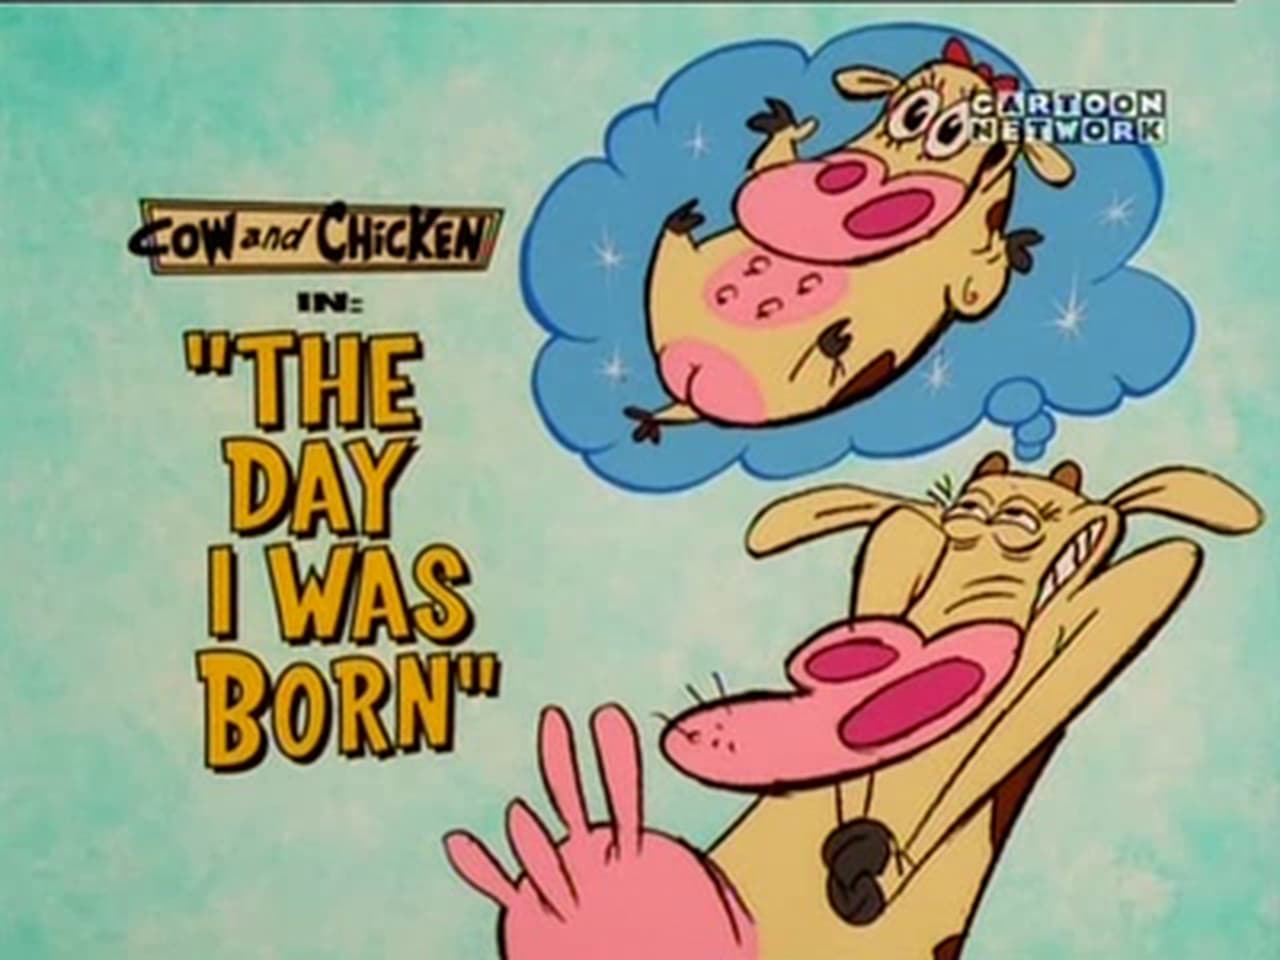 Cow and Chicken - Season 3 Episode 17 : The Day I Was Born